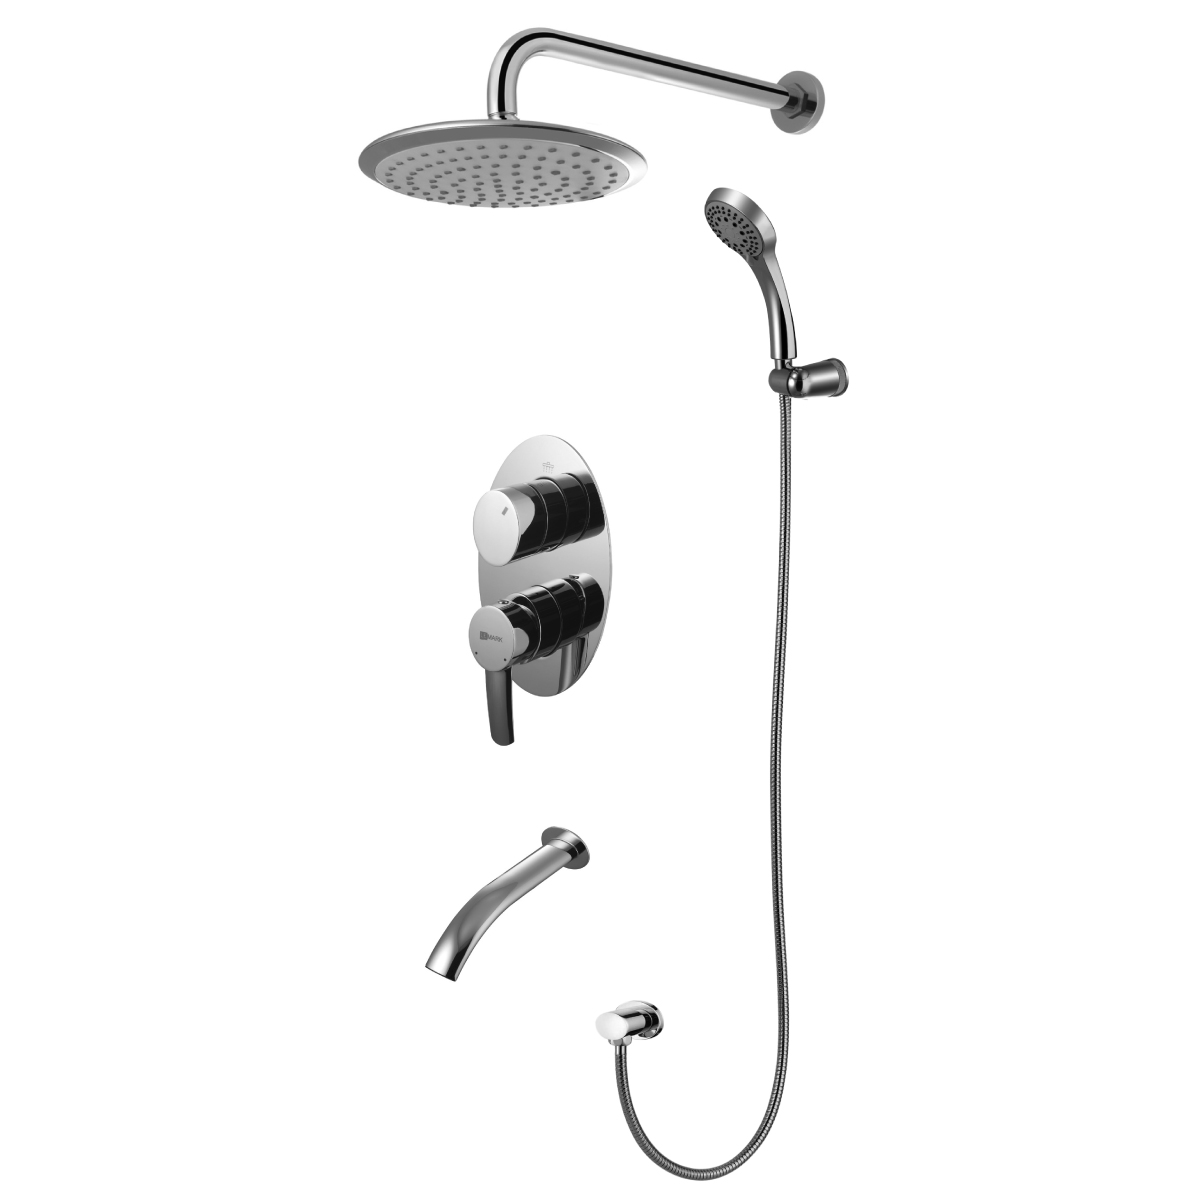 LM3222C Built-in bath and shower faucet